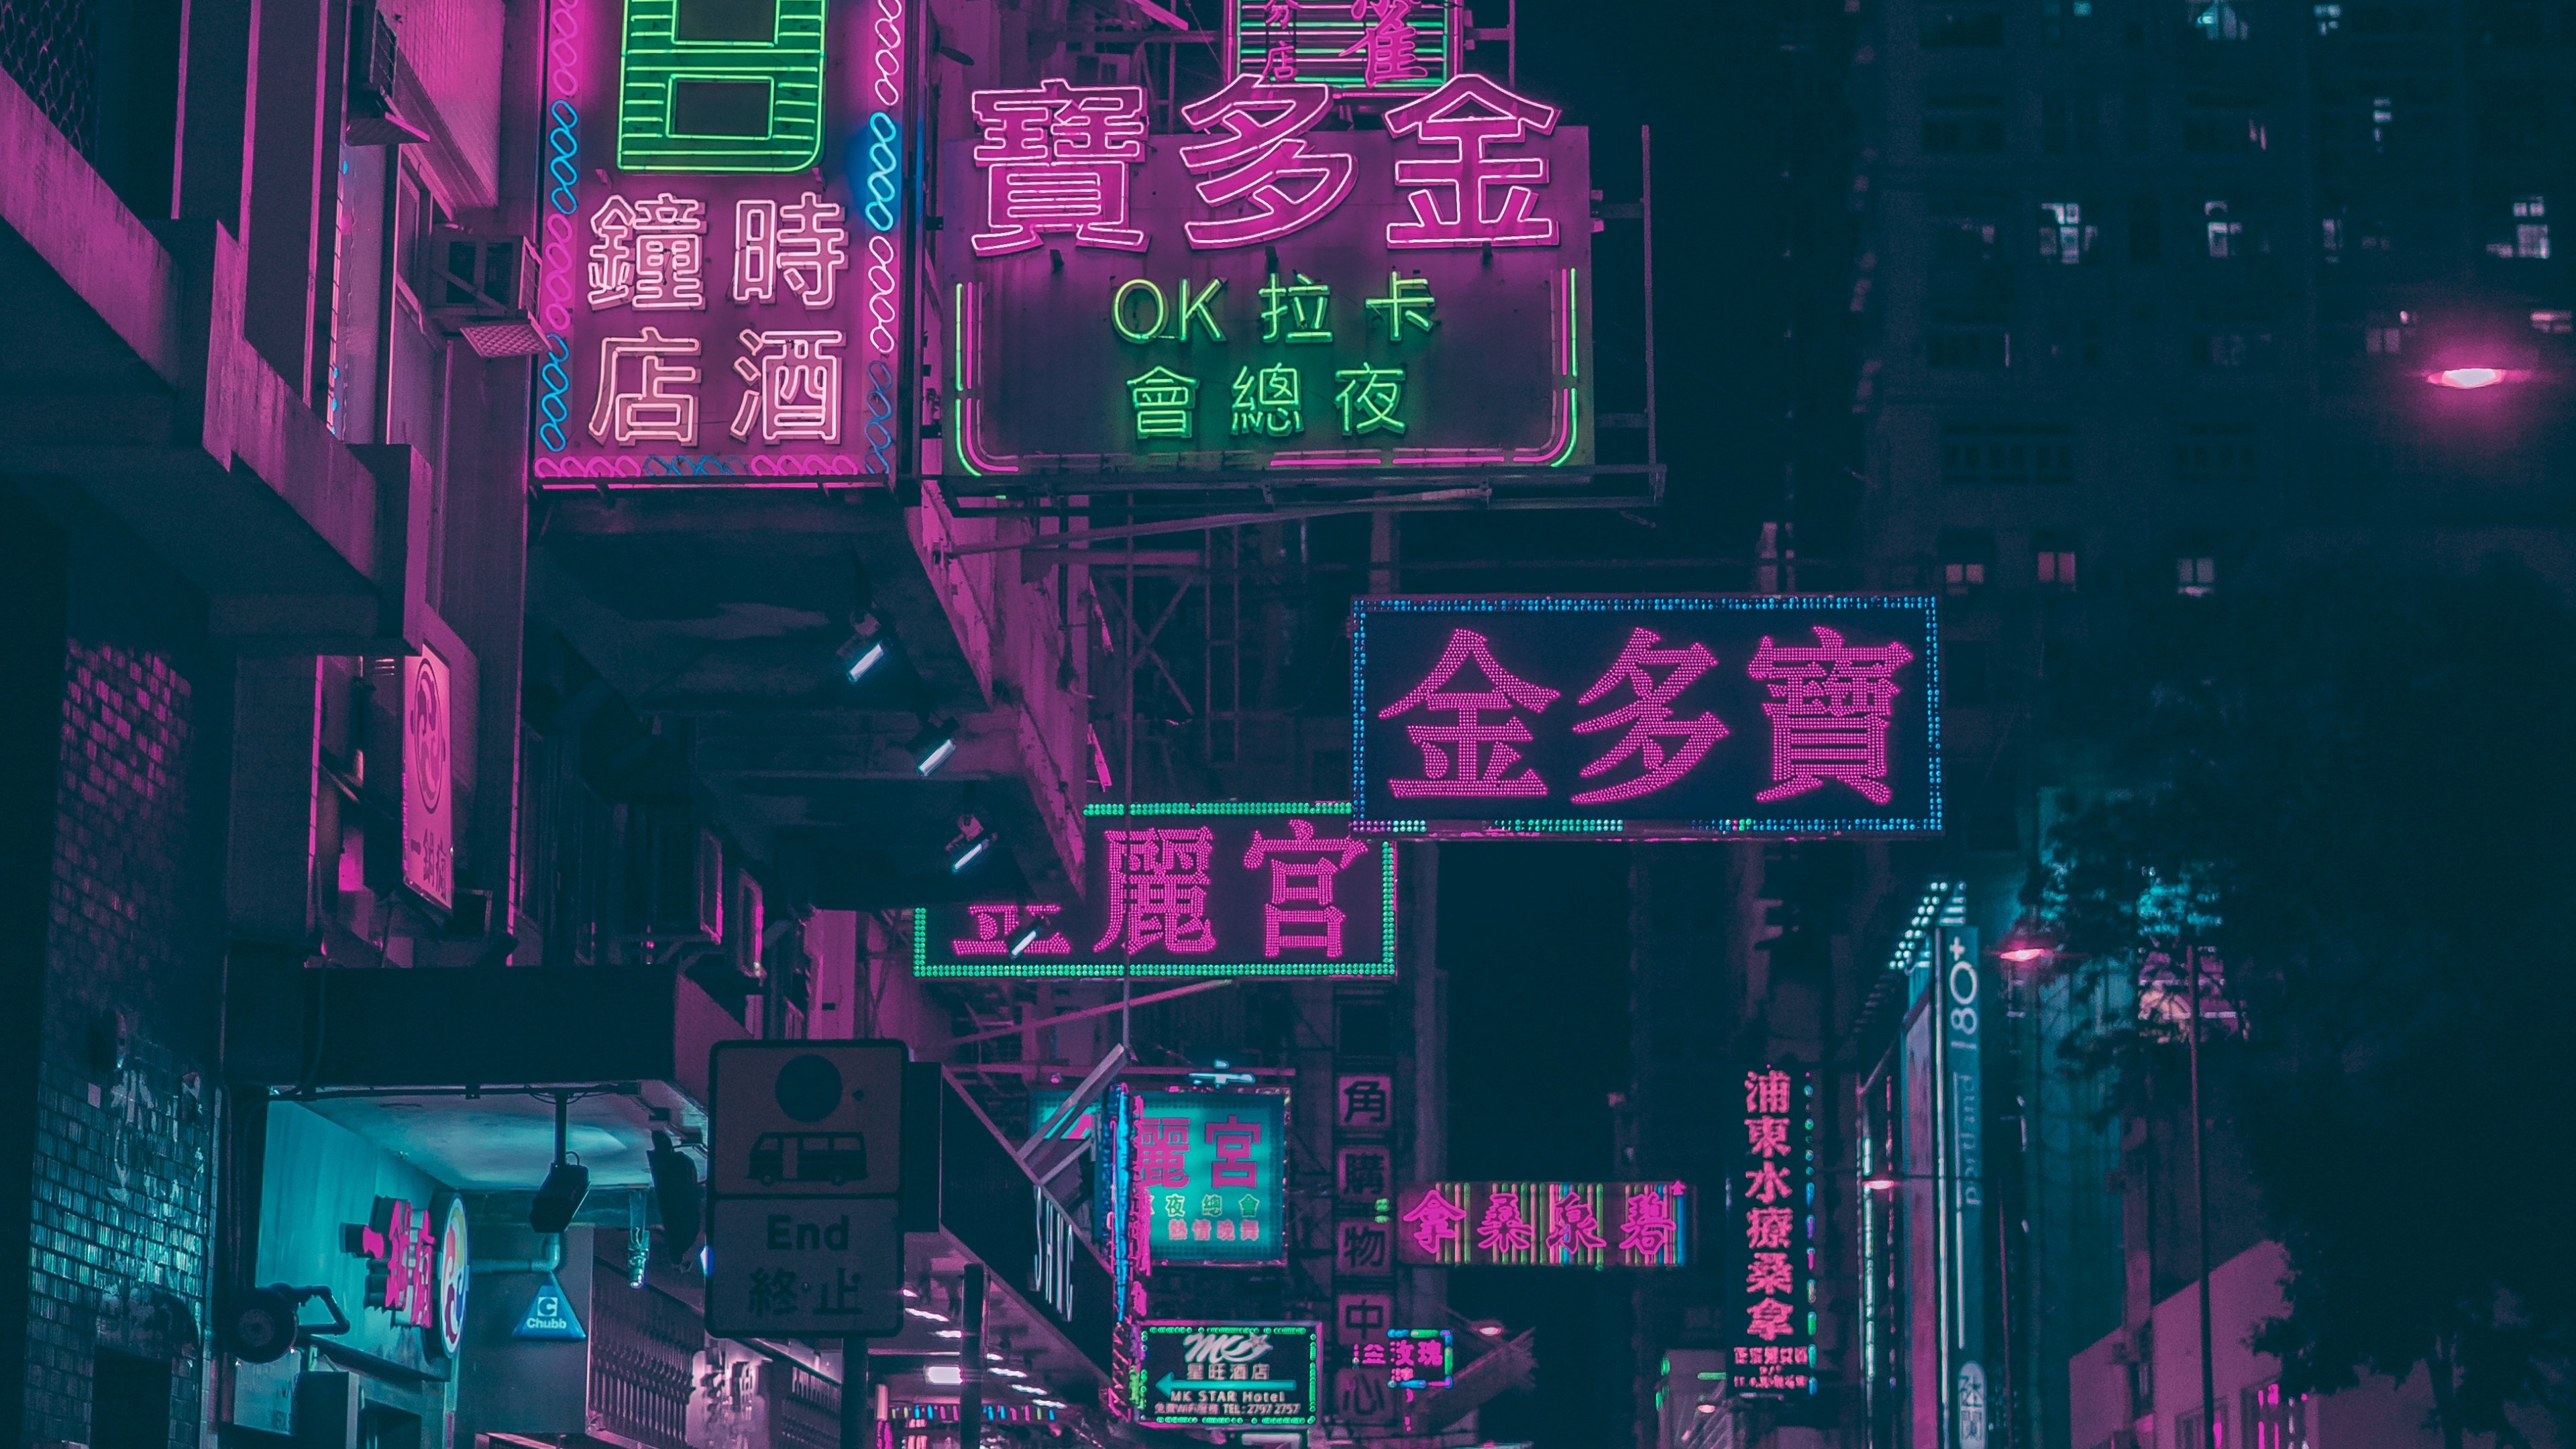 Urban 4K wallpaper for your desktop or mobile screen free and easy to download